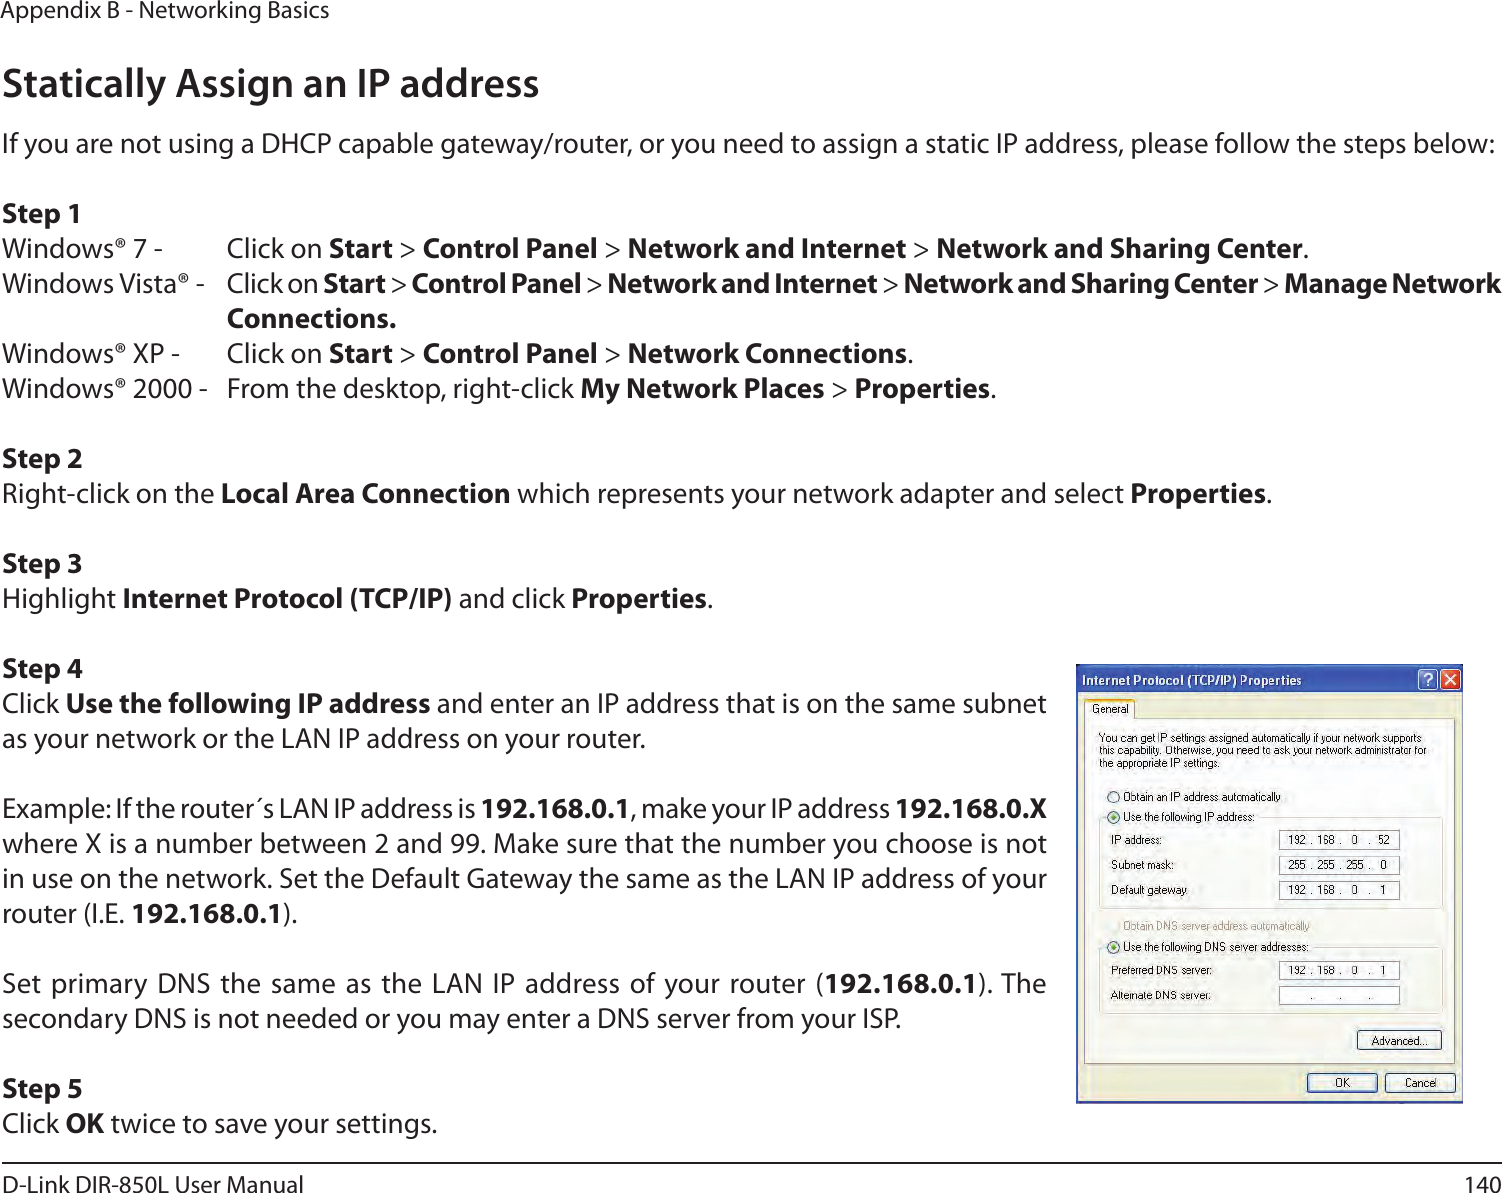 140D-Link DIR-850L User ManualAppendix B - Networking BasicsStatically Assign an IP addressIf you are not using a DHCP capable gateway/router, or you need to assign a static IP address, please follow the steps below:Step 1Windows® 7 -  Click on Start &gt; Control Panel &gt; Network and Internet &gt; Network and Sharing Center.Windows Vista® -  Click on Start &gt; Control Panel &gt; Network and Internet &gt; Network and Sharing Center &gt; Manage Network    Connections.Windows® XP -  Click on Start &gt; Control Panel &gt; Network Connections.Windows® 2000 -  From the desktop, right-click My Network Places &gt; Properties.Step 2Right-click on the Local Area Connection which represents your network adapter and select Properties.Step 3Highlight Internet Protocol (TCP/IP) and click Properties.Step 4Click Use the following IP address and enter an IP address that is on the same subnet as your network or the LAN IP address on your router. Example: If the router´s LAN IP address is 192.168.0.1, make your IP address 192.168.0.X where X is a number between 2 and 99. Make sure that the number you choose is not in use on the network. Set the Default Gateway the same as the LAN IP address of your router (I.E. 192.168.0.1). Set primary DNS the same as the LAN IP address of your router (192.168.0.1). The secondary DNS is not needed or you may enter a DNS server from your ISP.Step 5Click OK twice to save your settings.